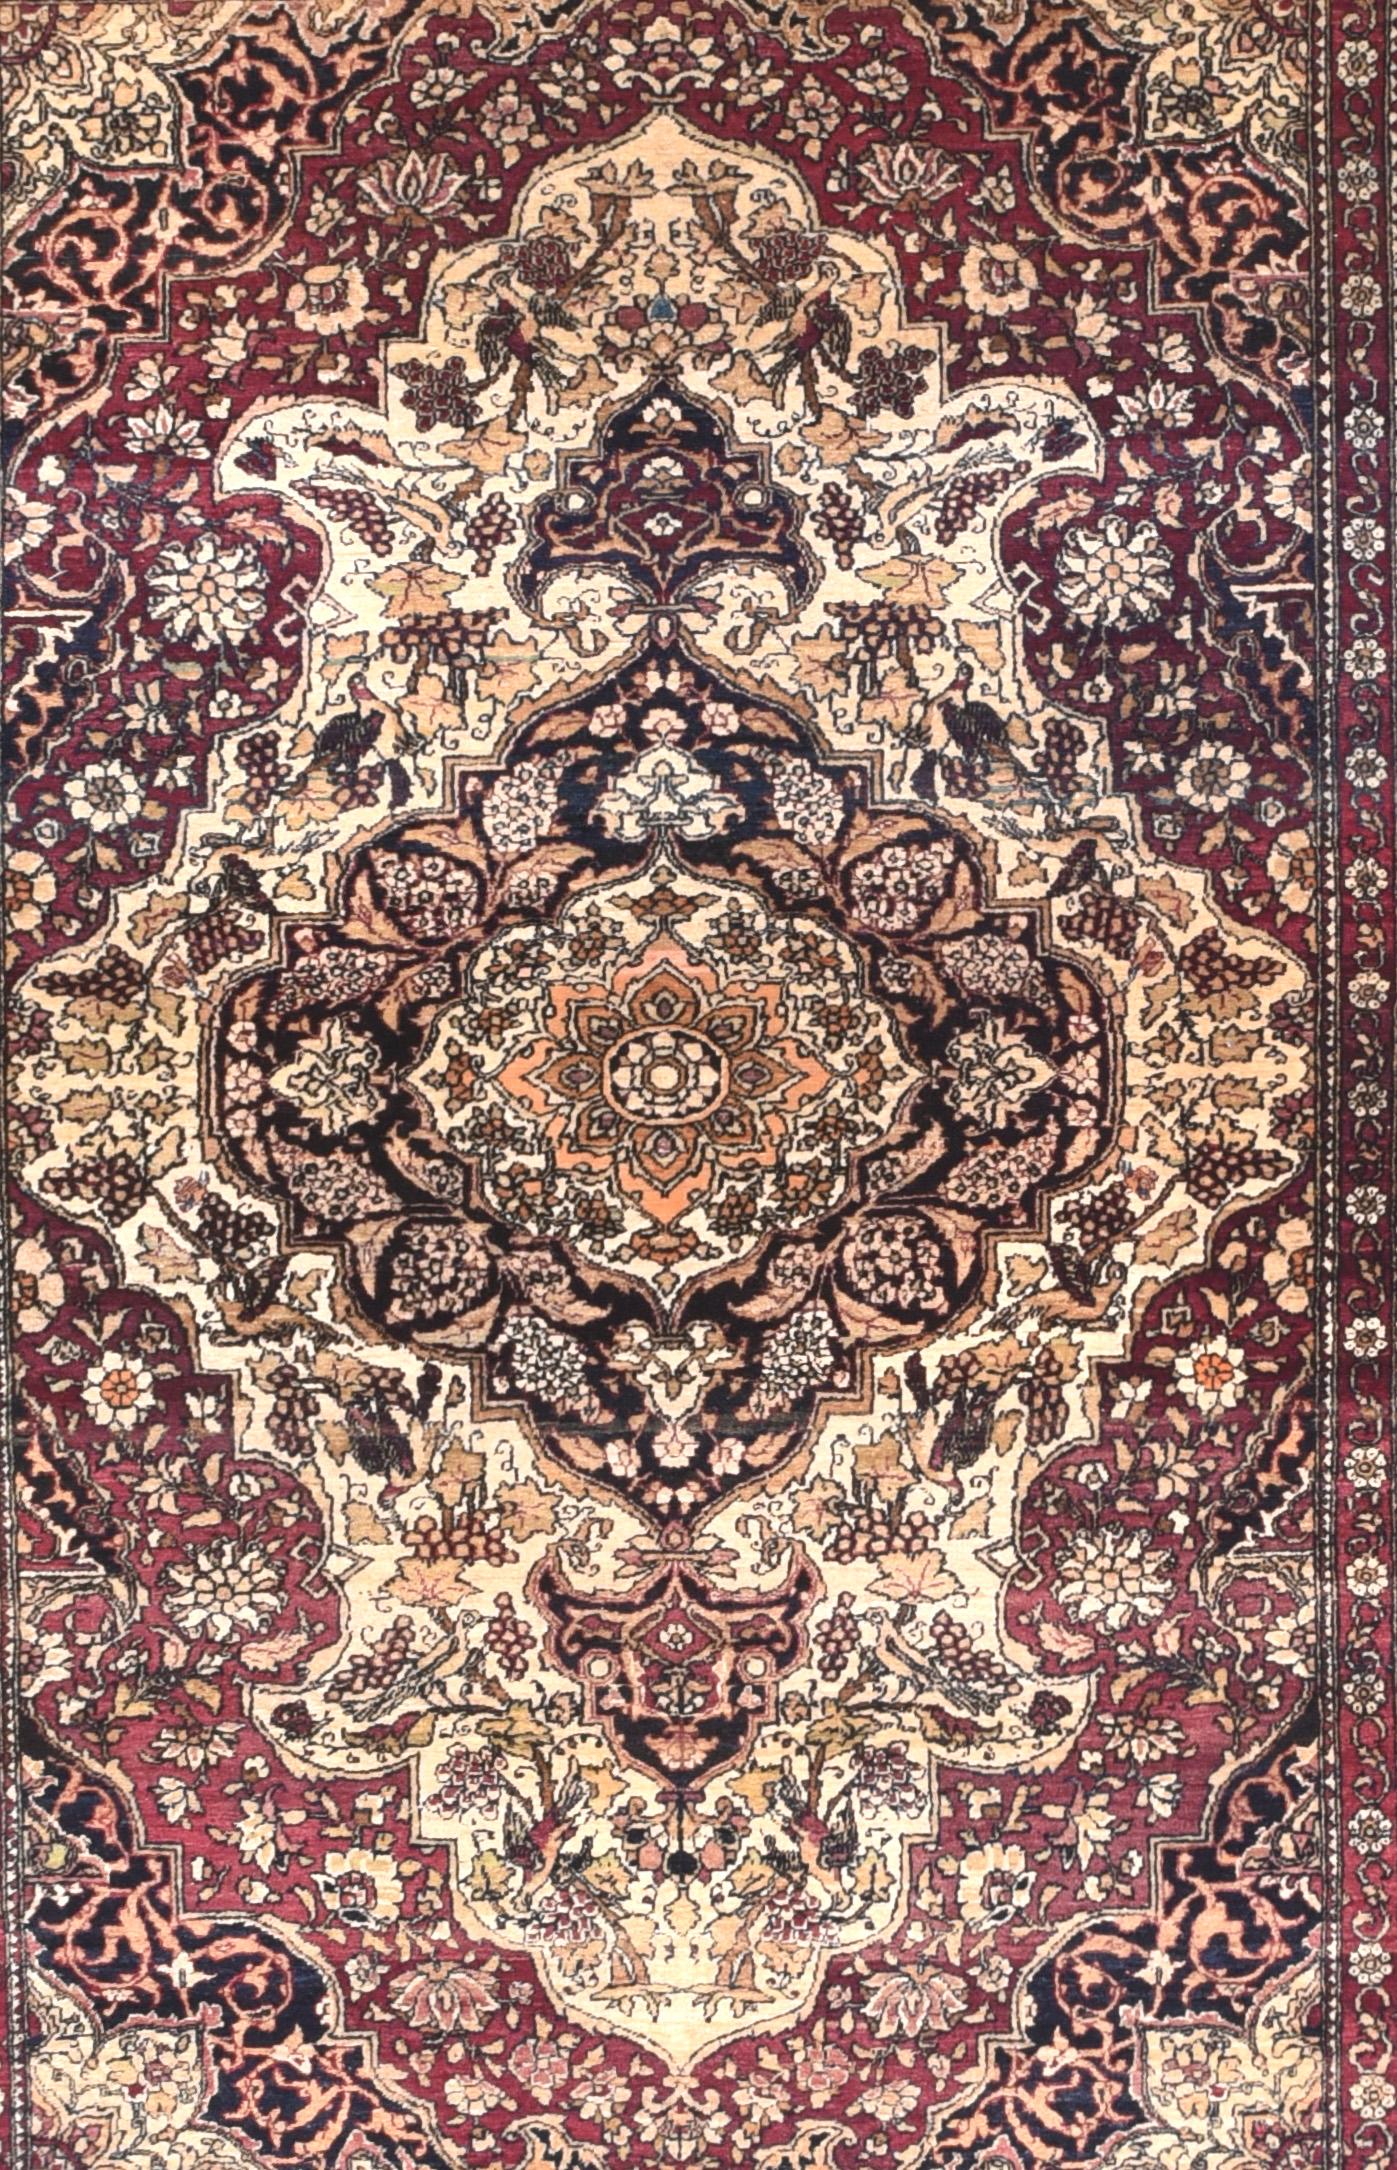 Carpets made in Tehran have curvilinear patterns. The majority are around fifty years old. It is very hard to find rugs and carpets made in Tehran in recent years, except ones produced by master weavers for museums or rich buyers. One of the most